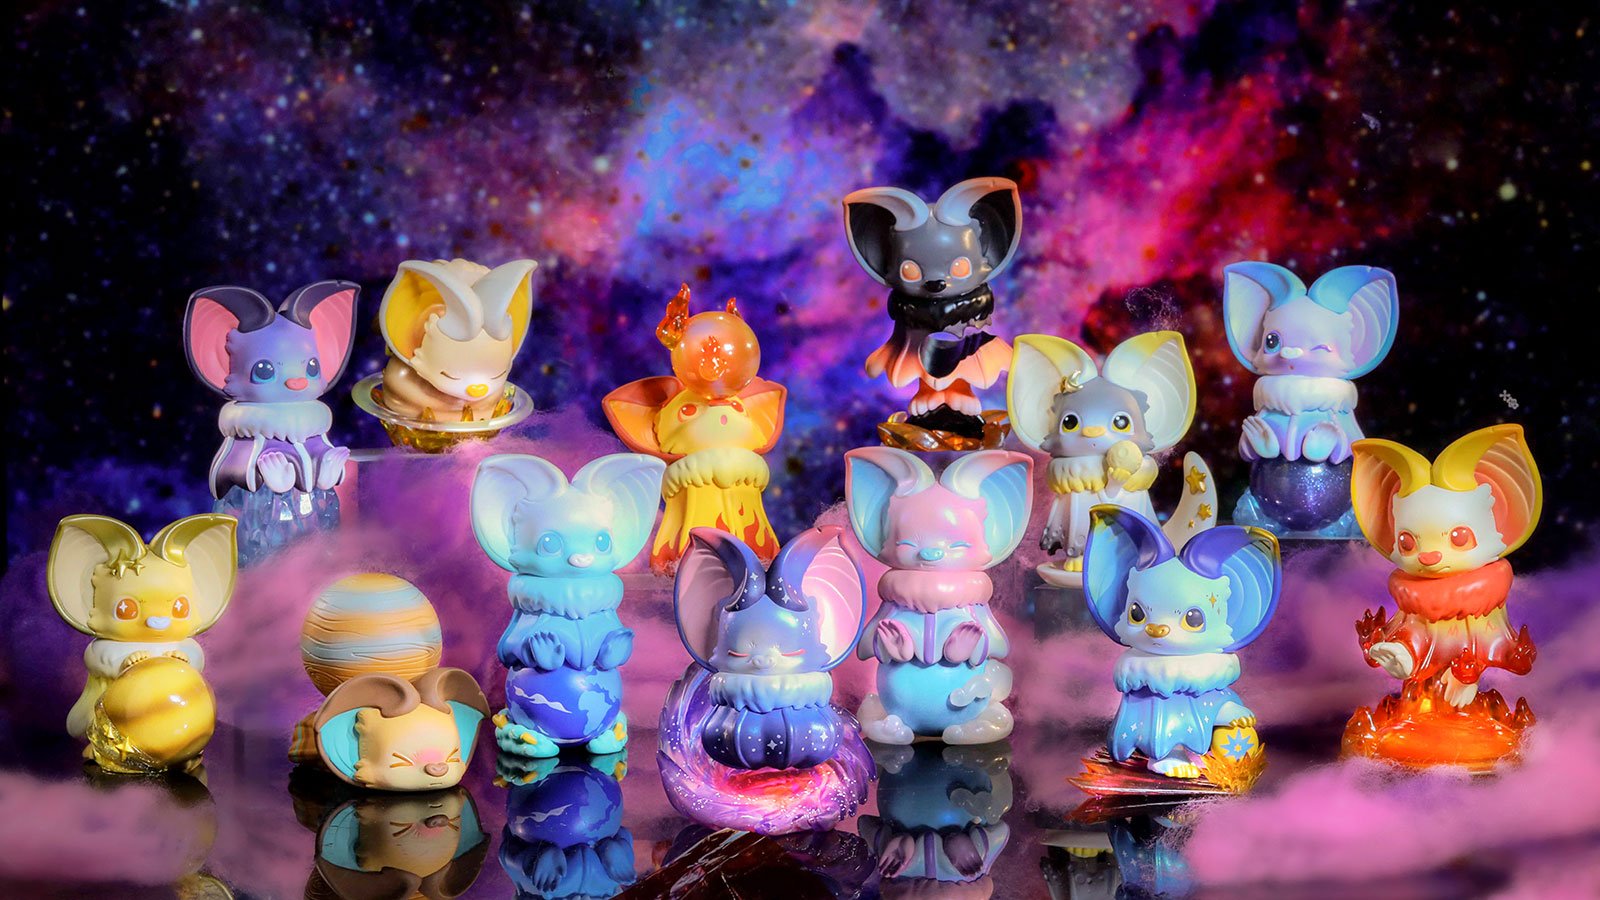 A group of small figurines from Yoki My Little Planets Blind Box Series by Yoyo Yeung.